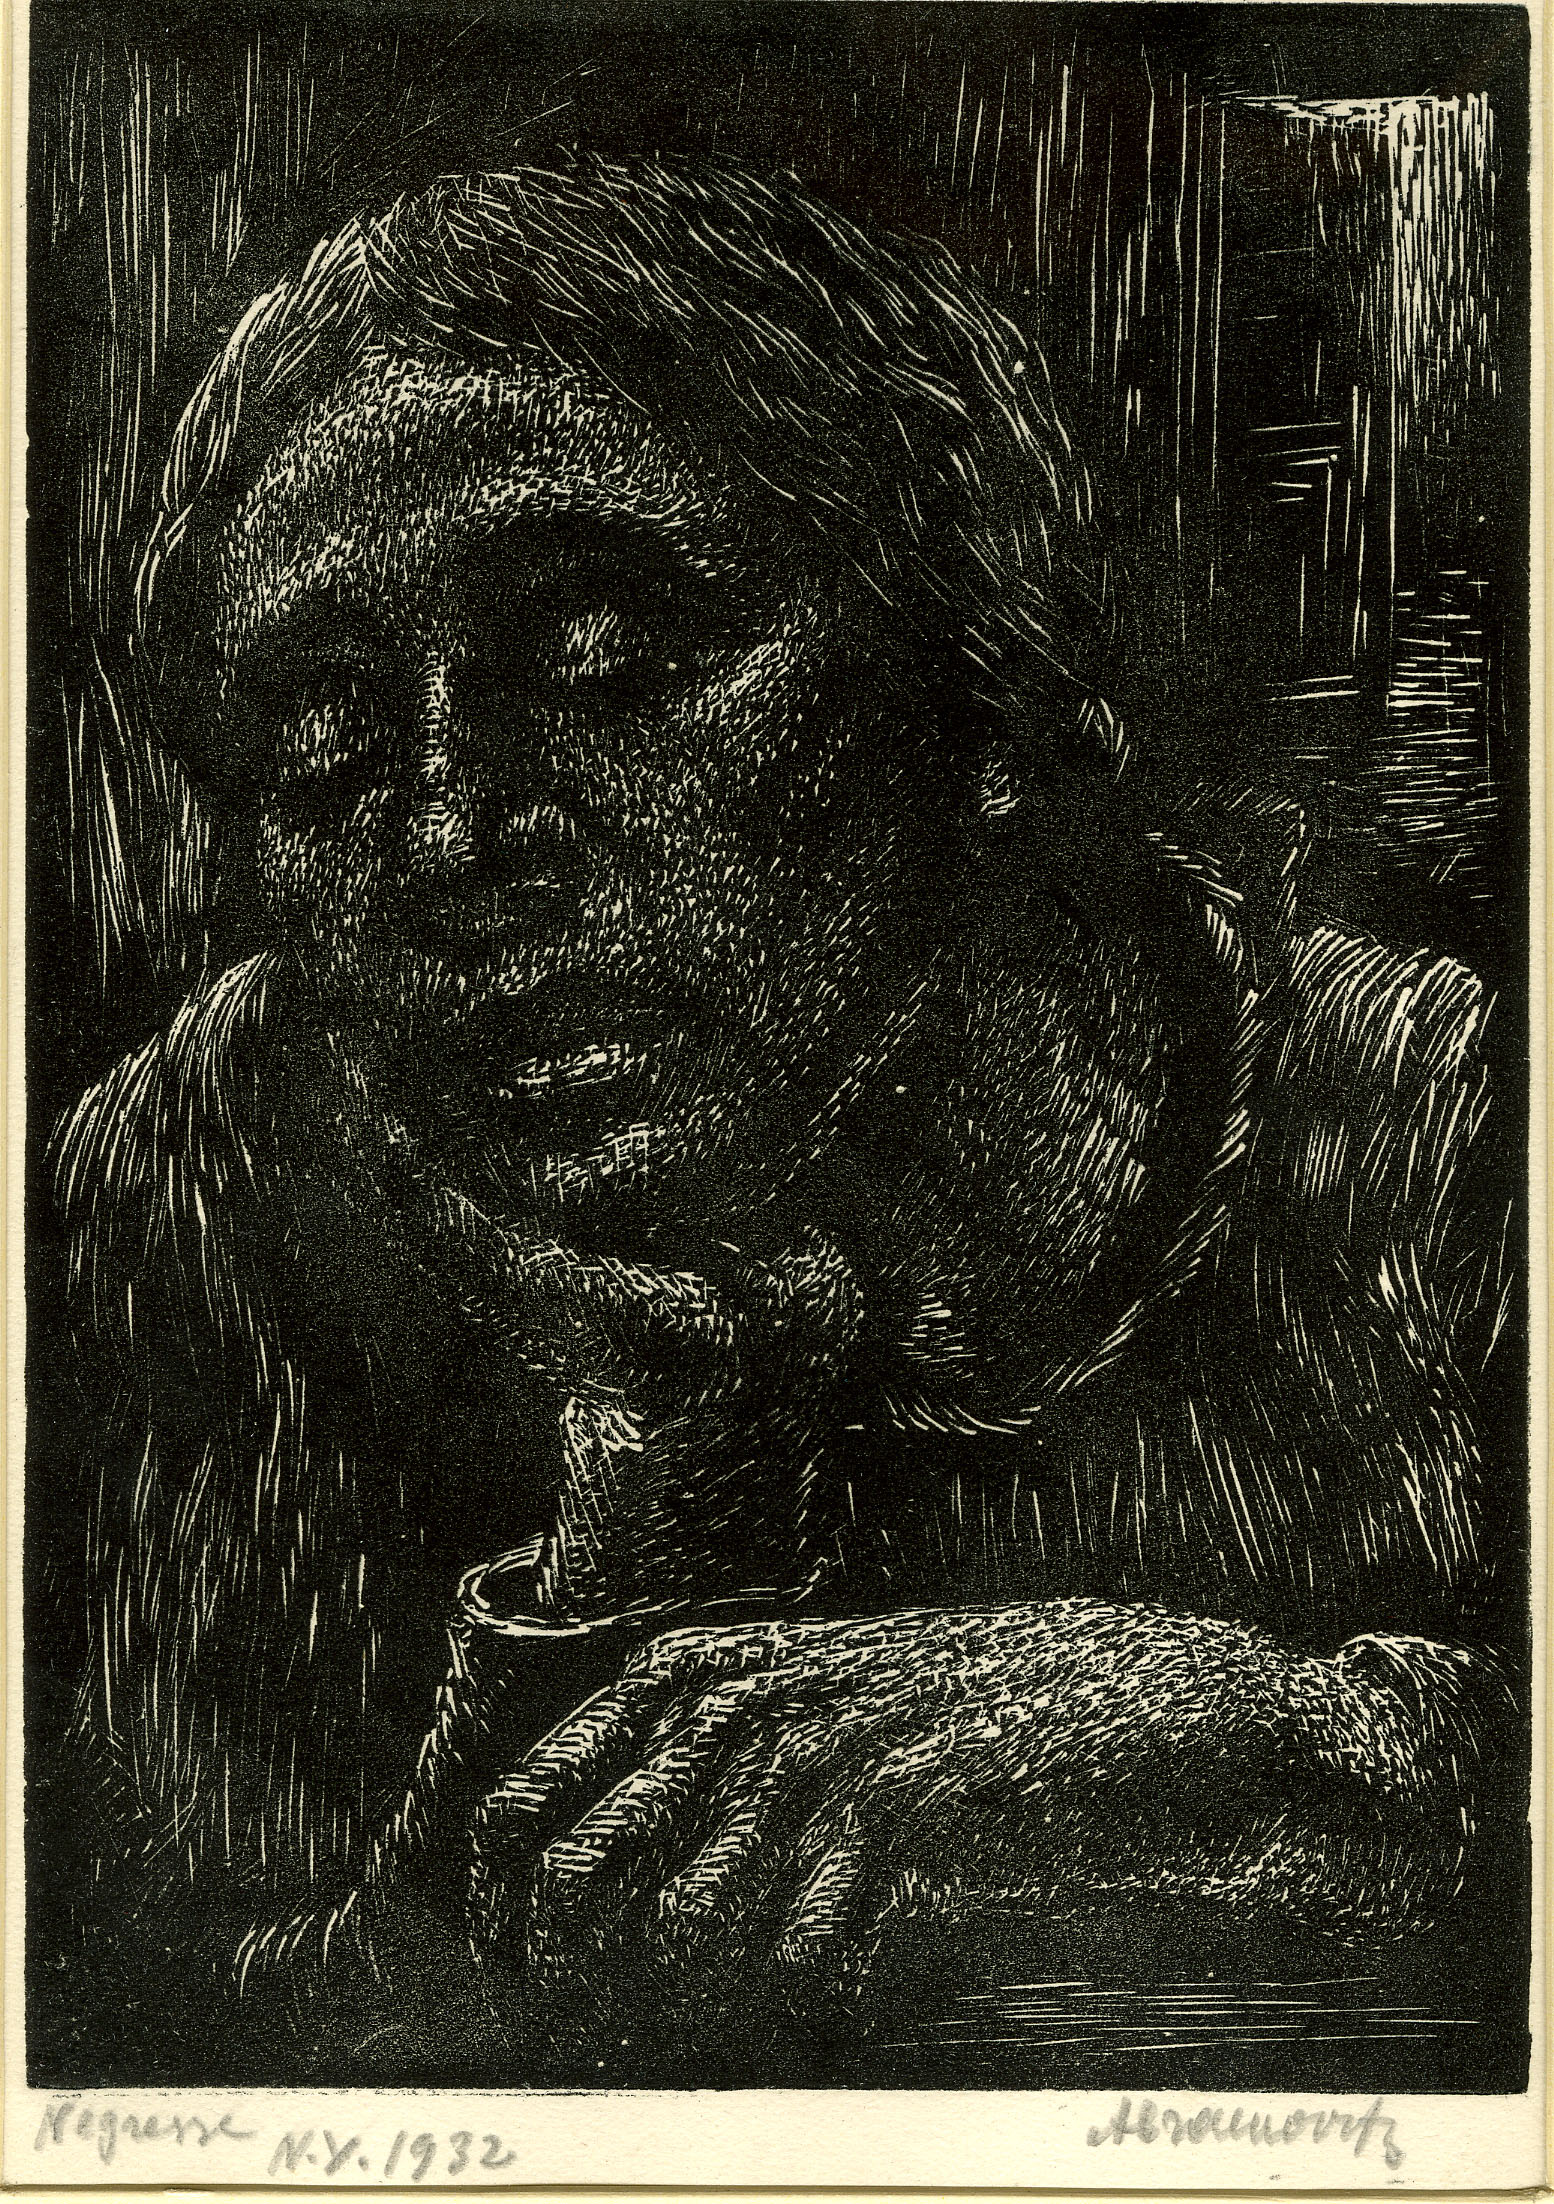 Head and shoulders of a black woman (1932)